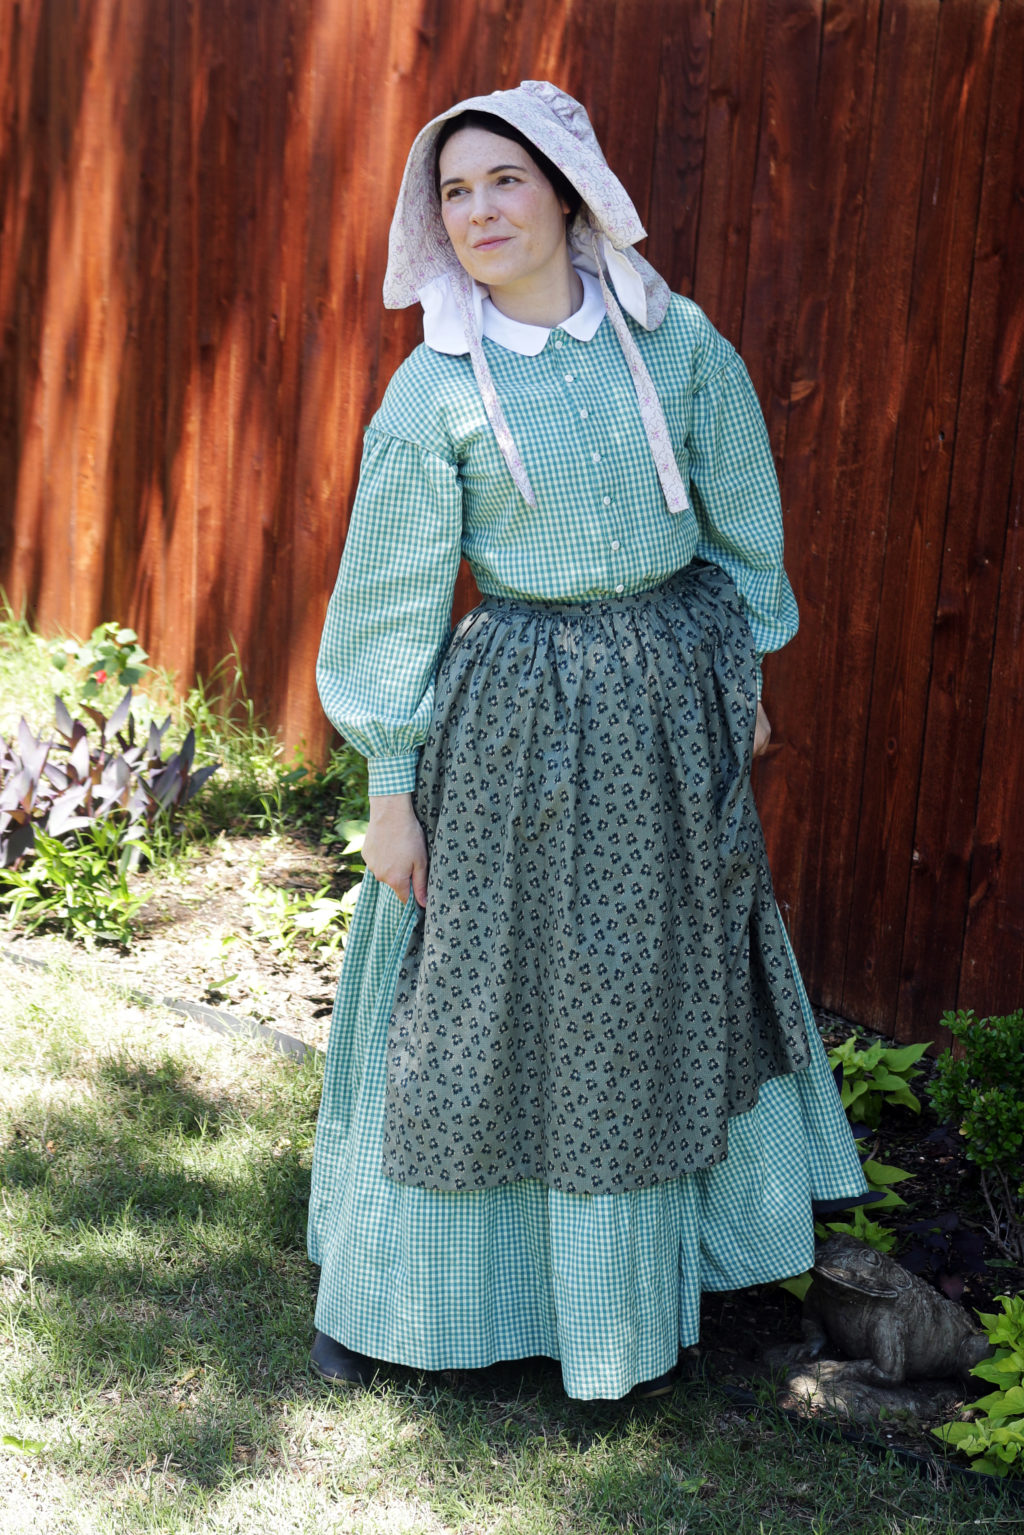 1860s Work Dress and Accessories – Dixie DIY